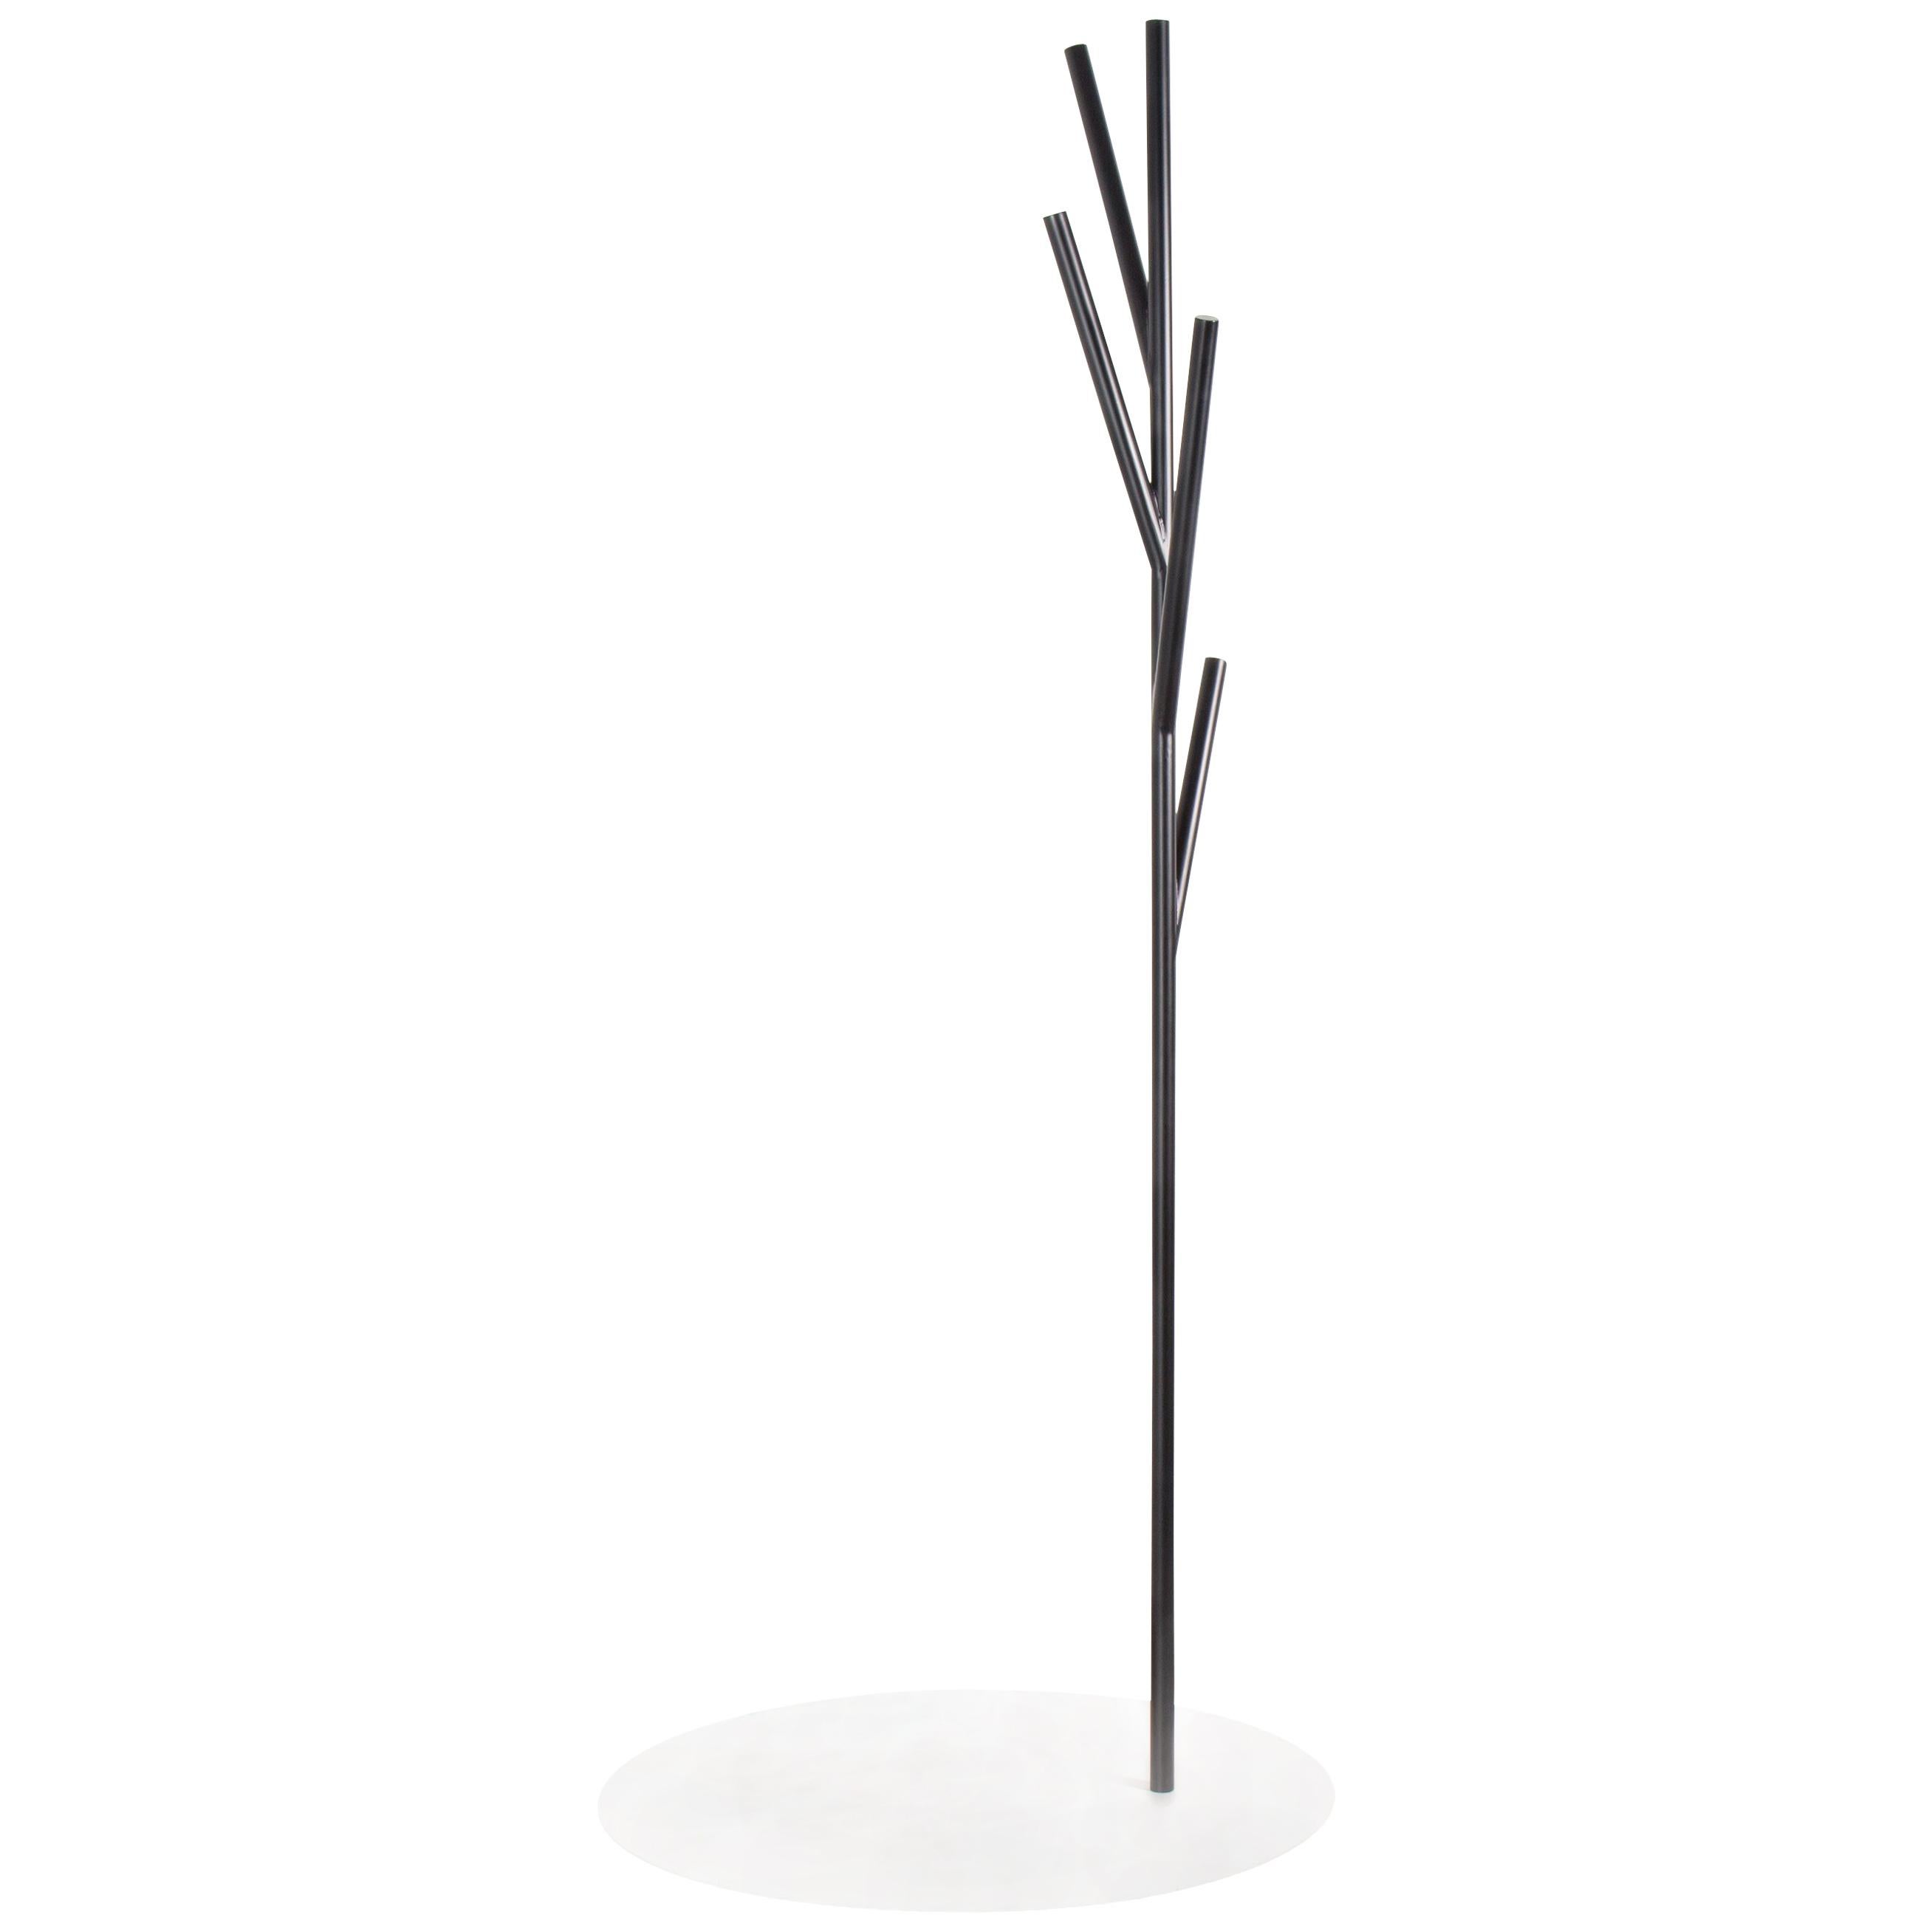 Contemporary Abstract Black and White Sculptural Hall Tree Valet with Base Plate